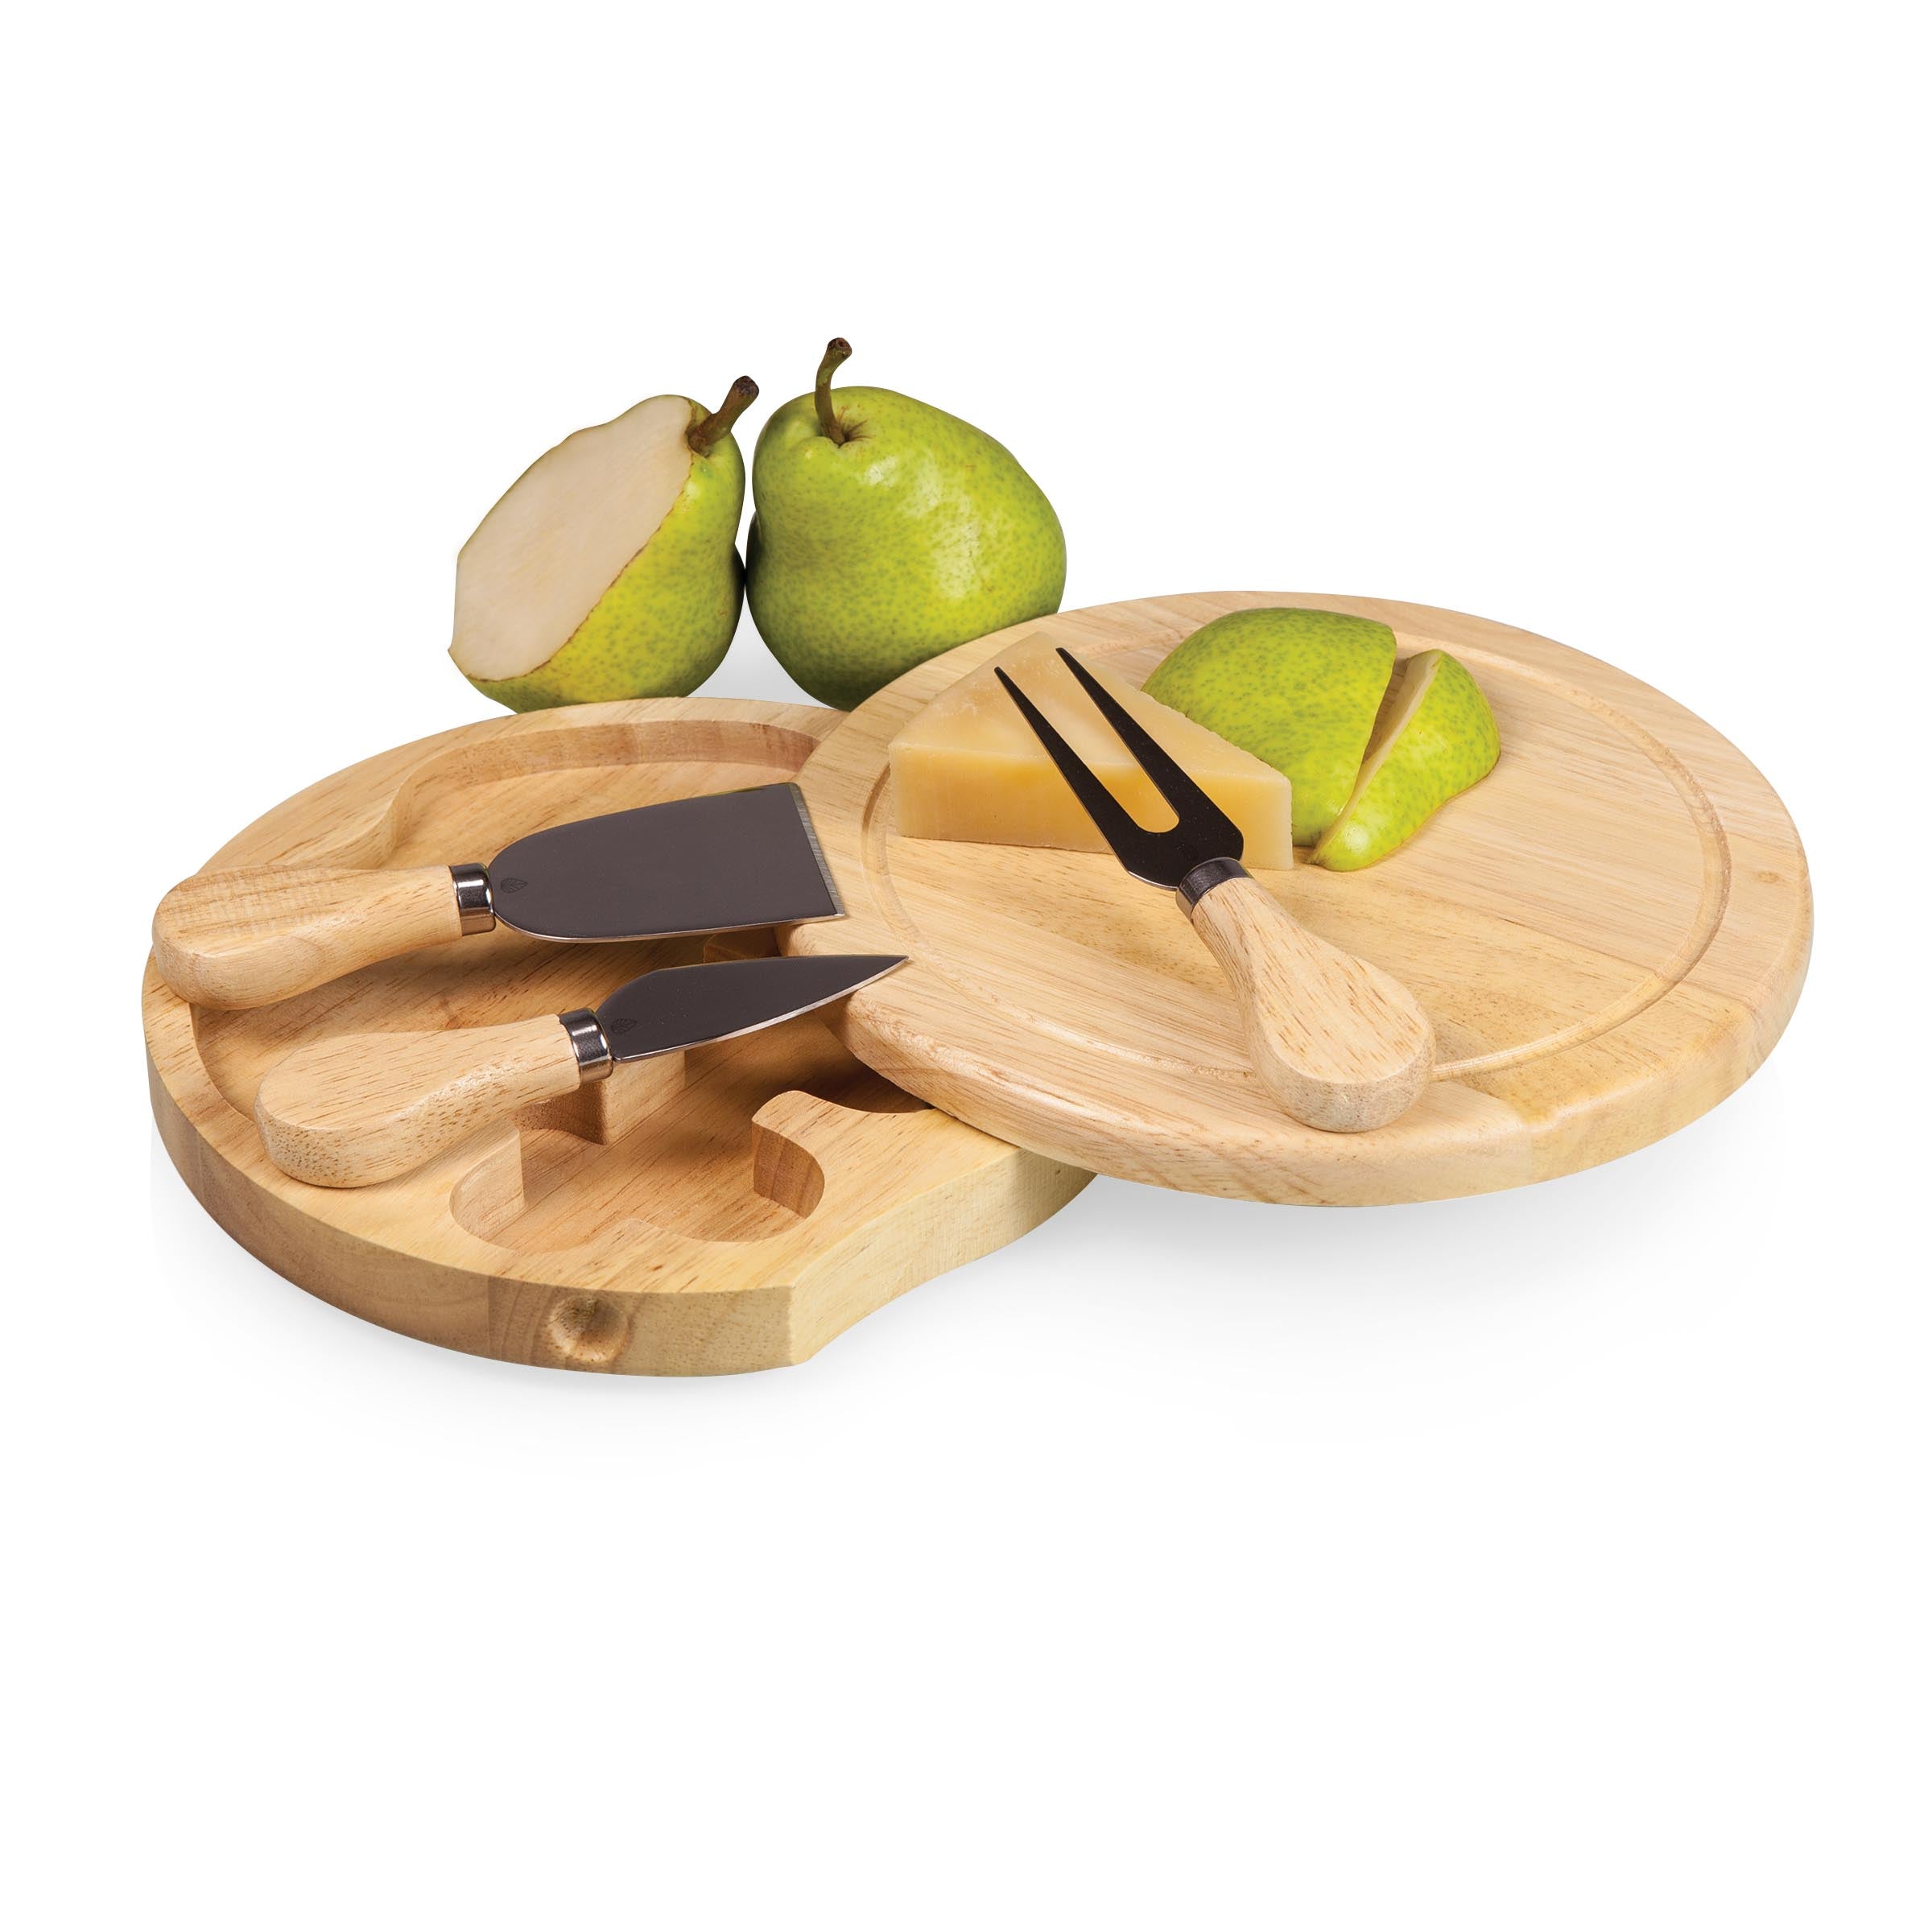 Kentucky Wildcats - Brie Cheese Cutting Board & Tools Set